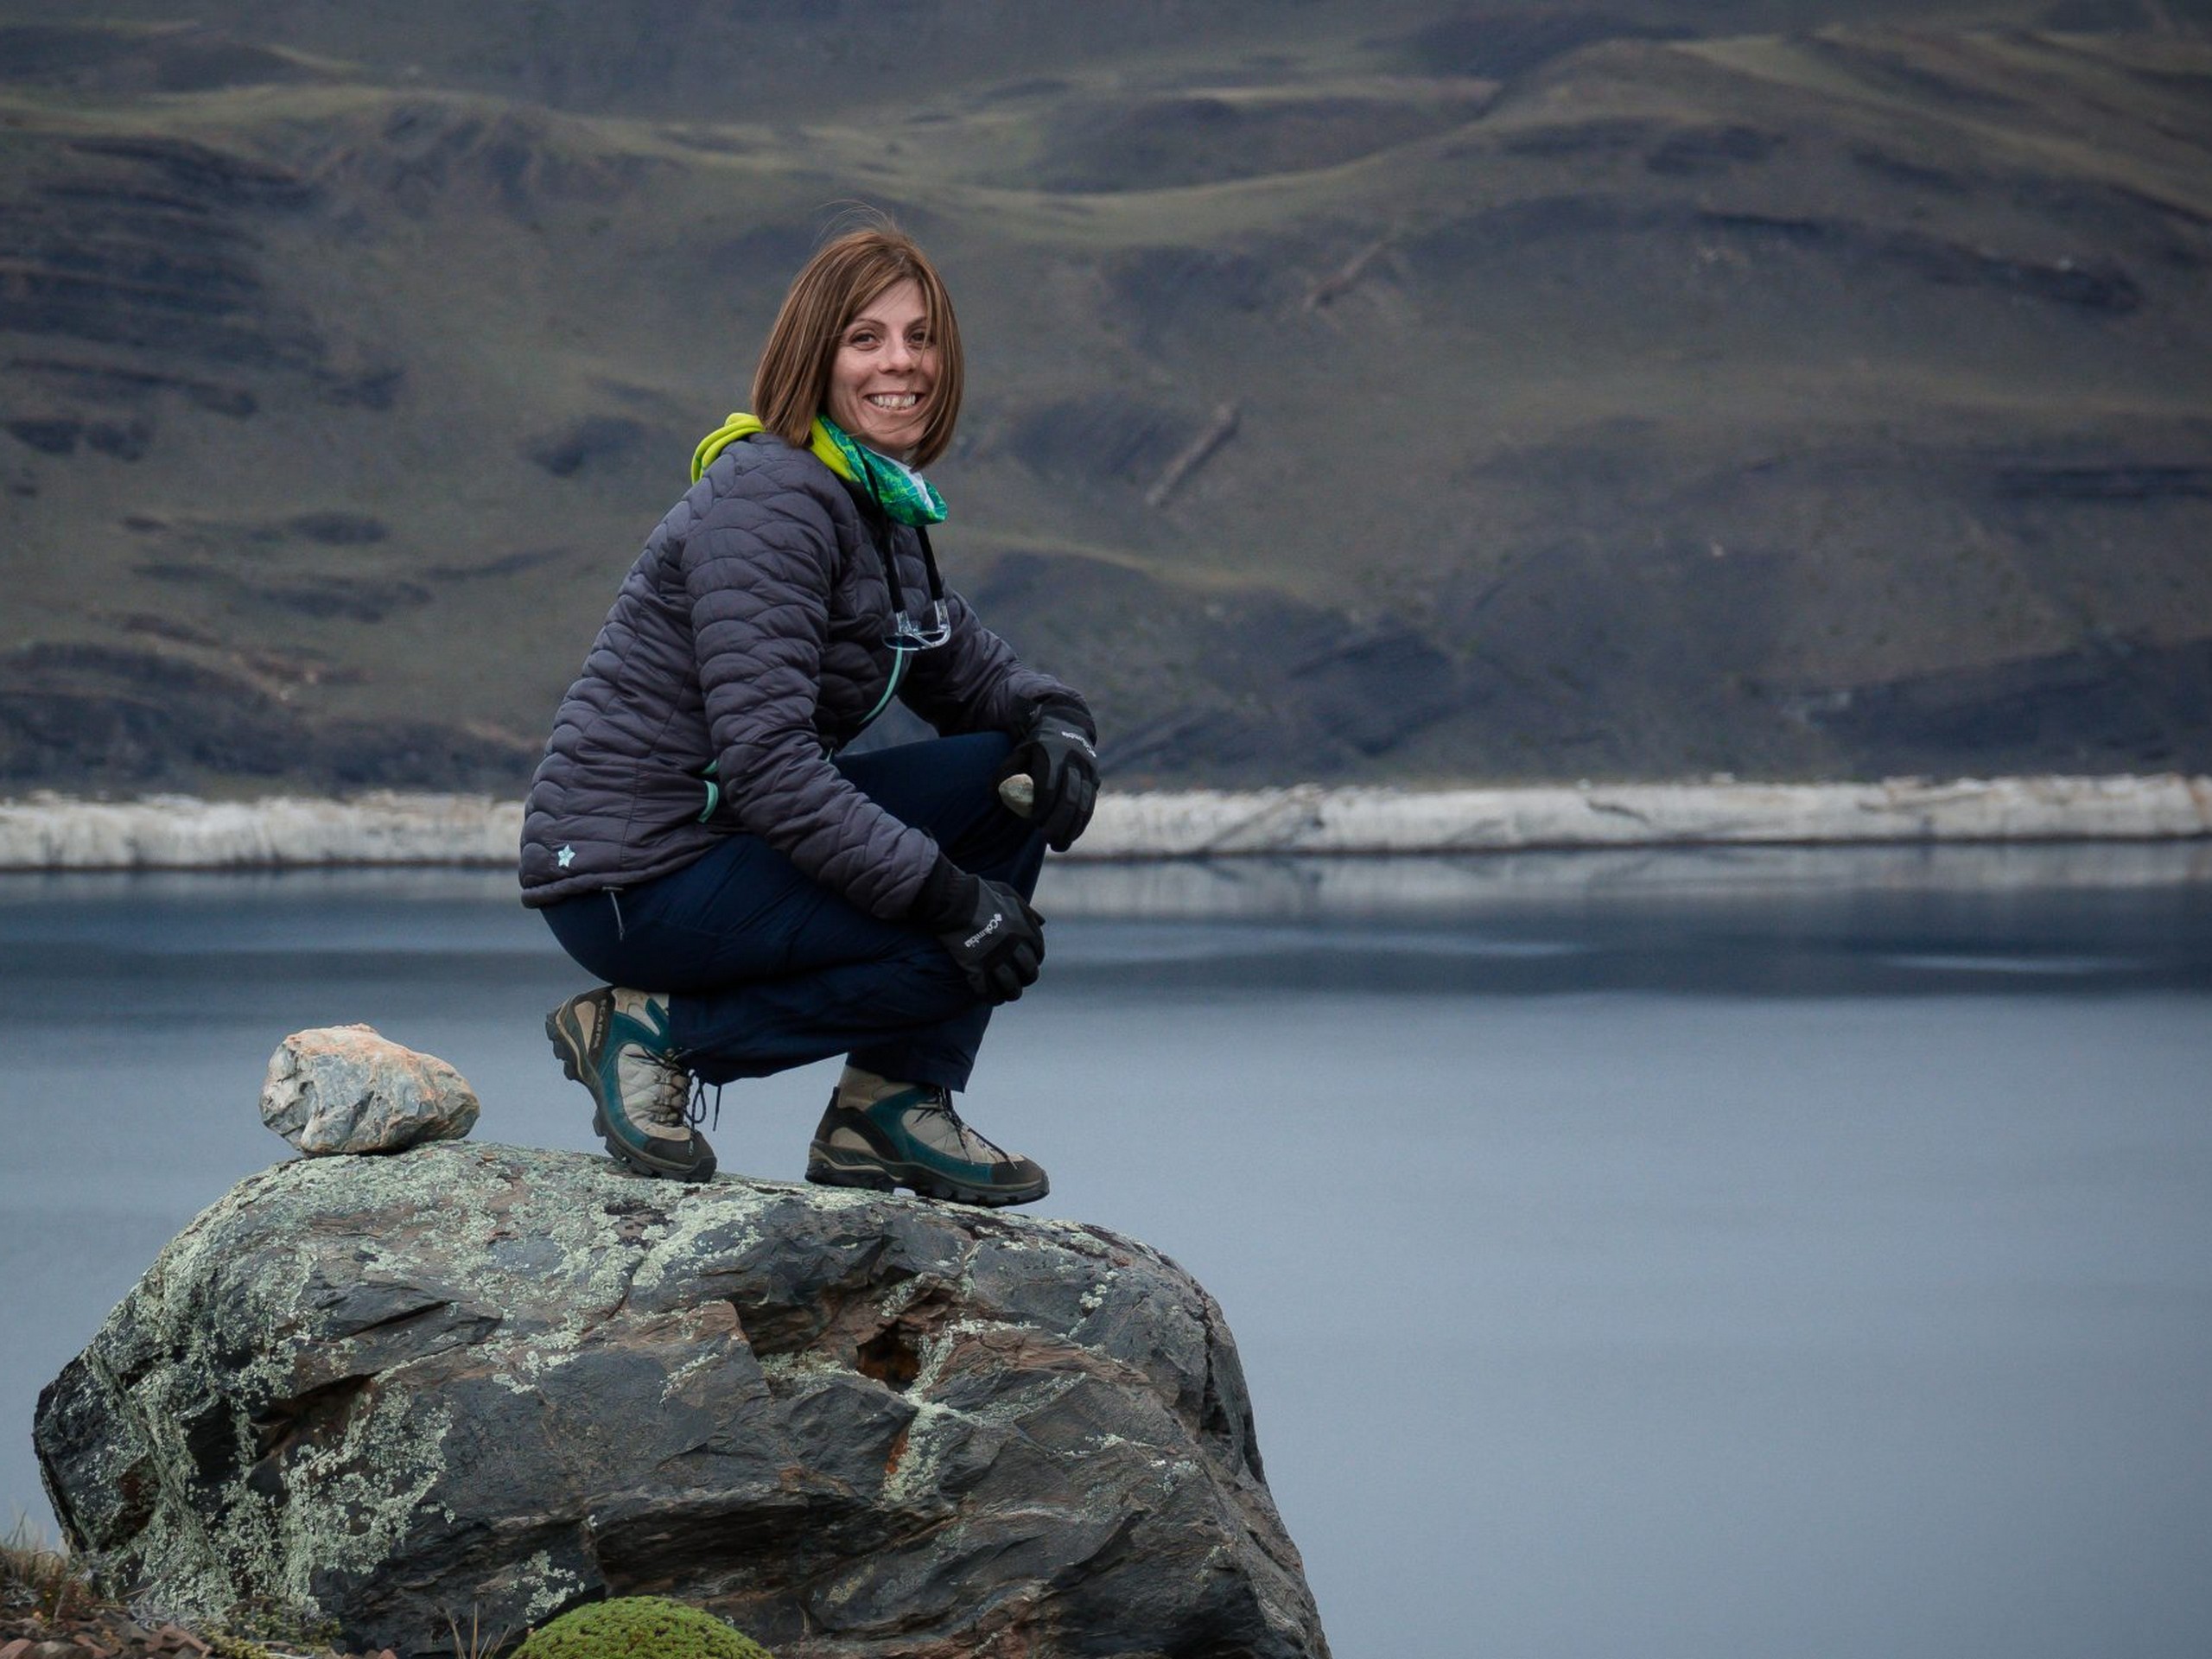 Lady posing on a rock near Patagonias shores